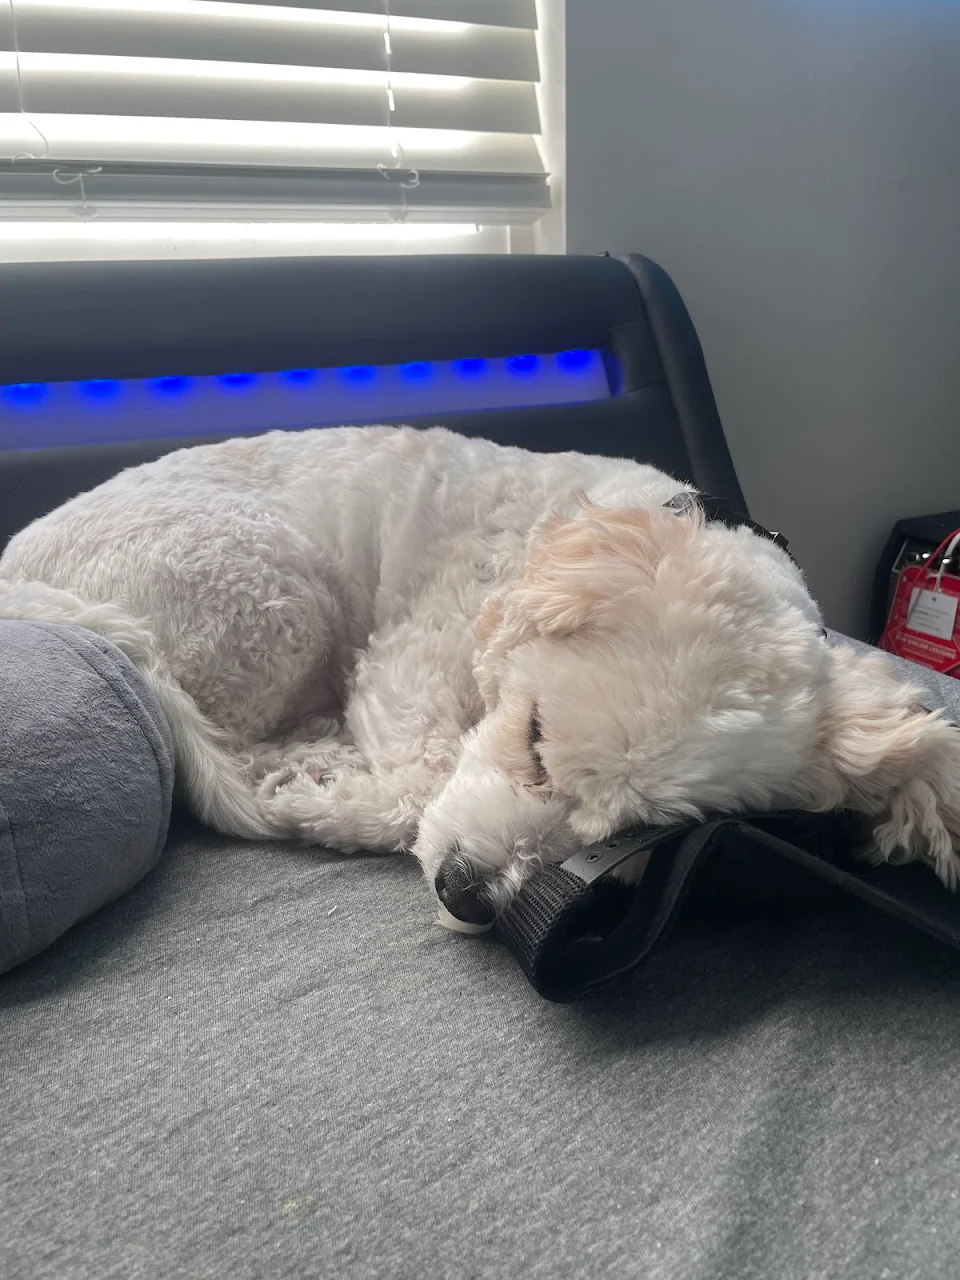 my dog really likes sleeping on random items that are on my bed.